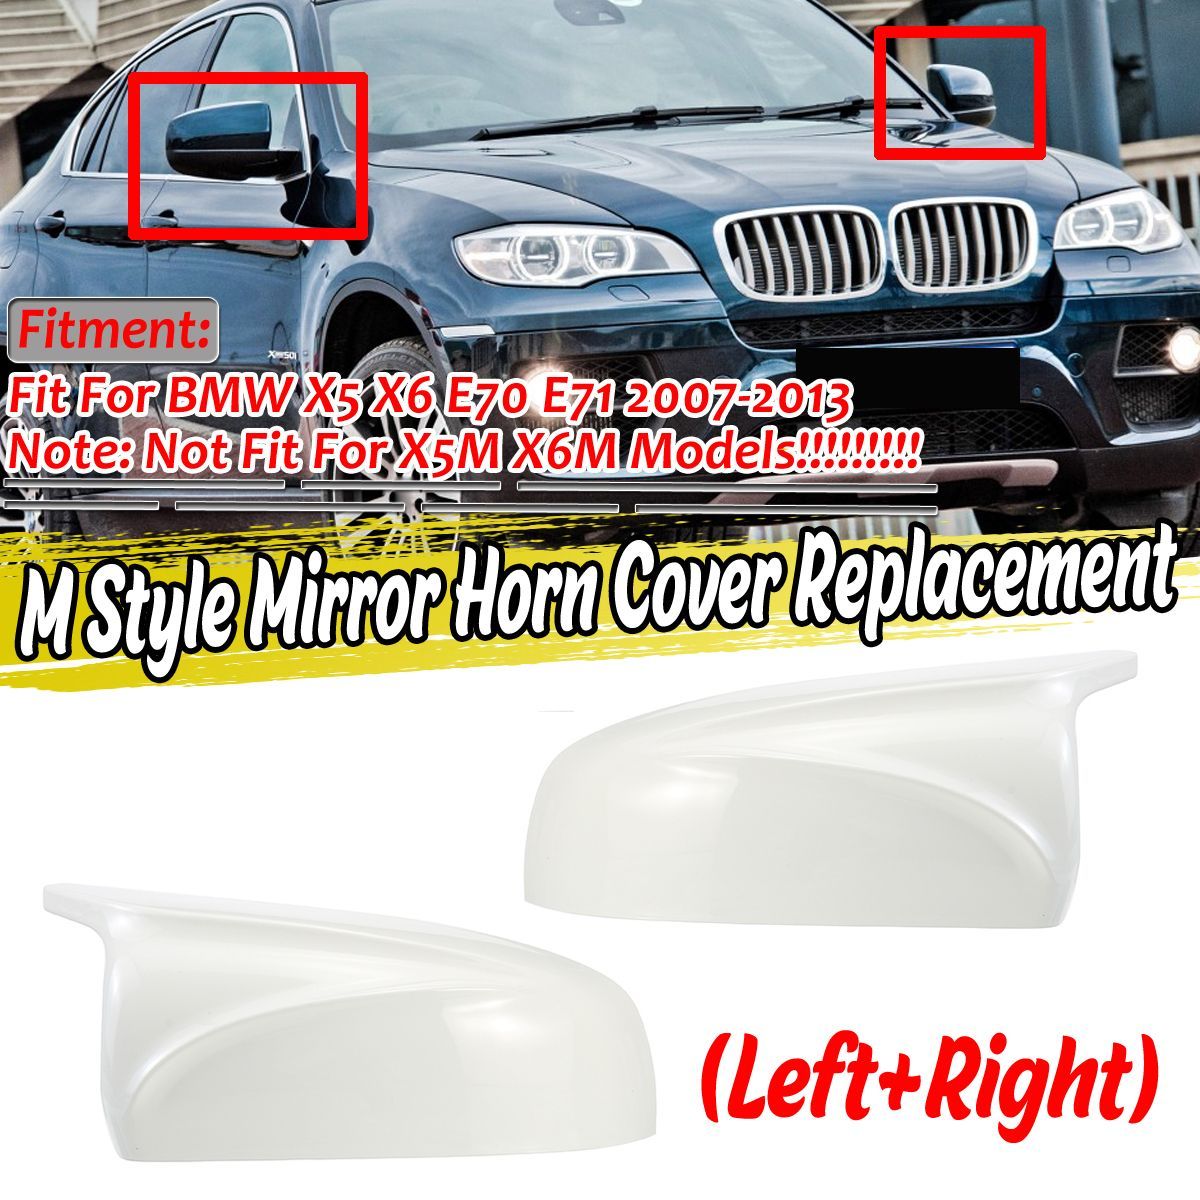 1-Pair-Glossy-White-Rear-View-Mirror-Cap-Cover-Replacement-Left--Right-For-BMW-X5-X6-E70-E71-2007-20-1754884